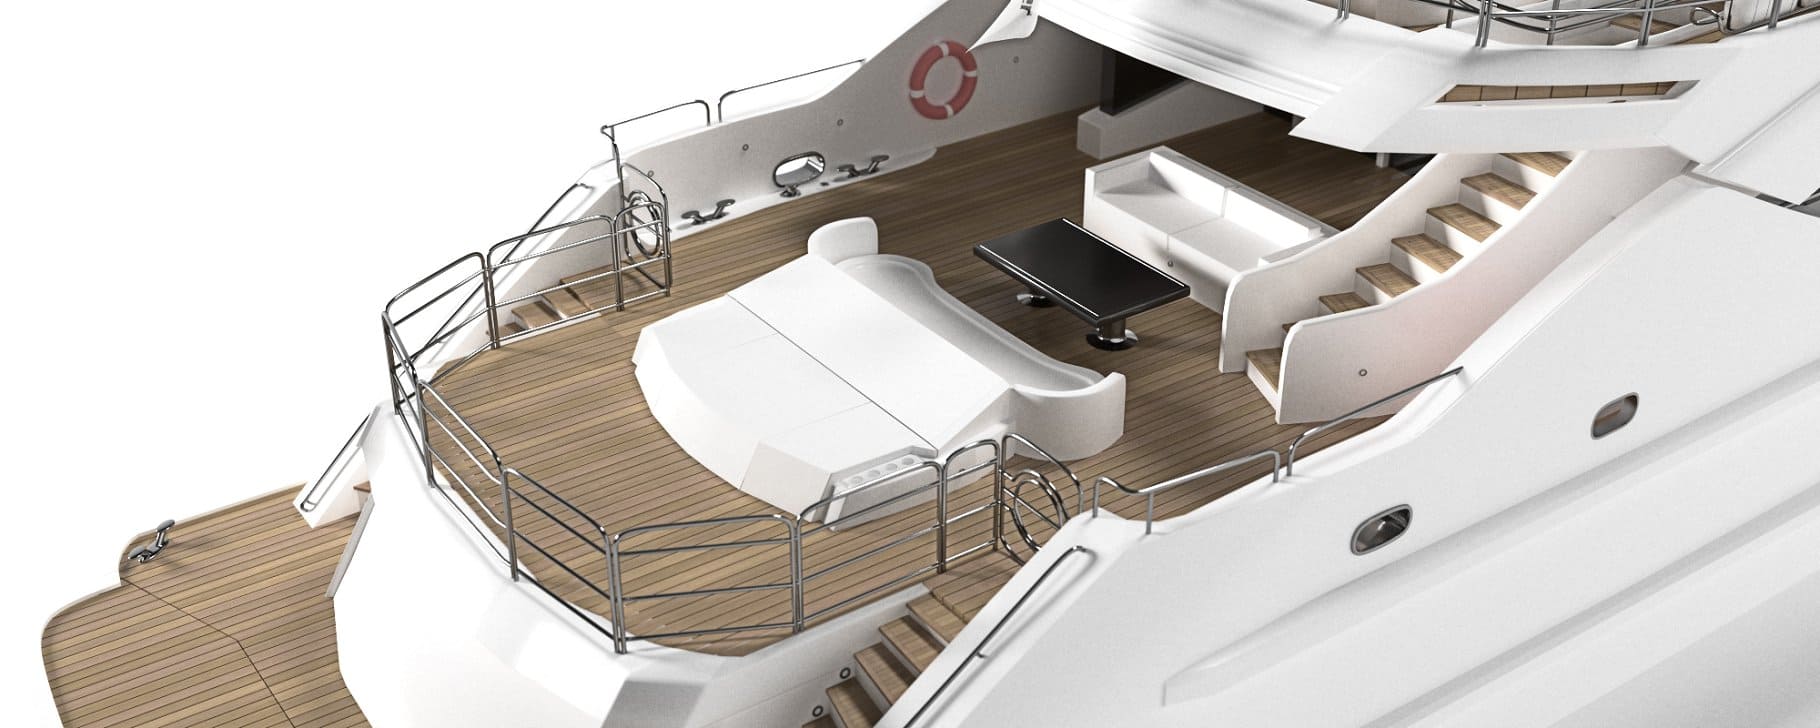 The middle deck with the lounge area of the white Sunseeker predator 130 Superyacht.